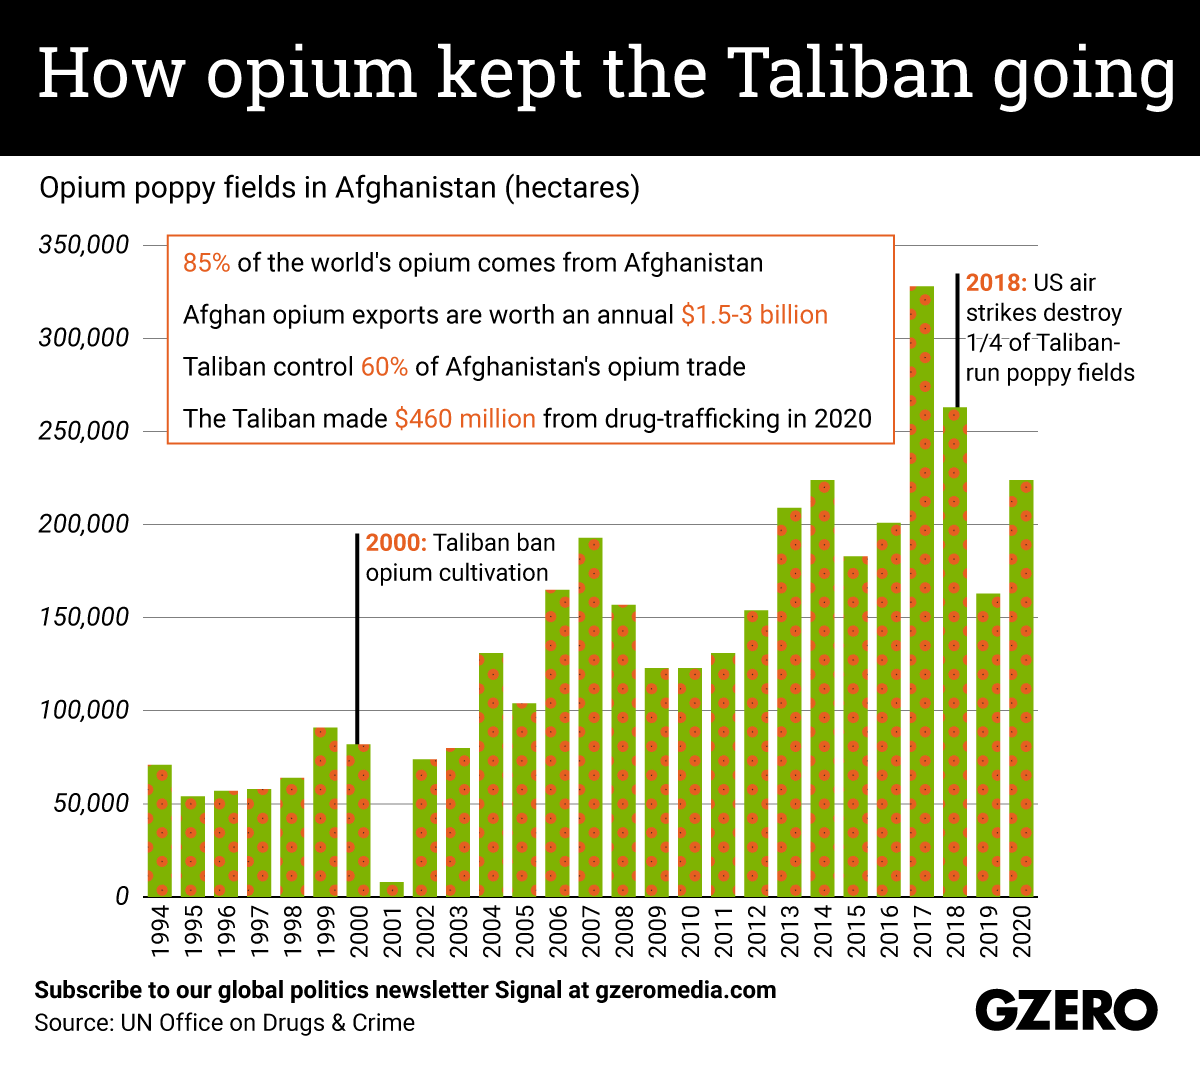 The Graphic Truth: How opium kept the Taliban going